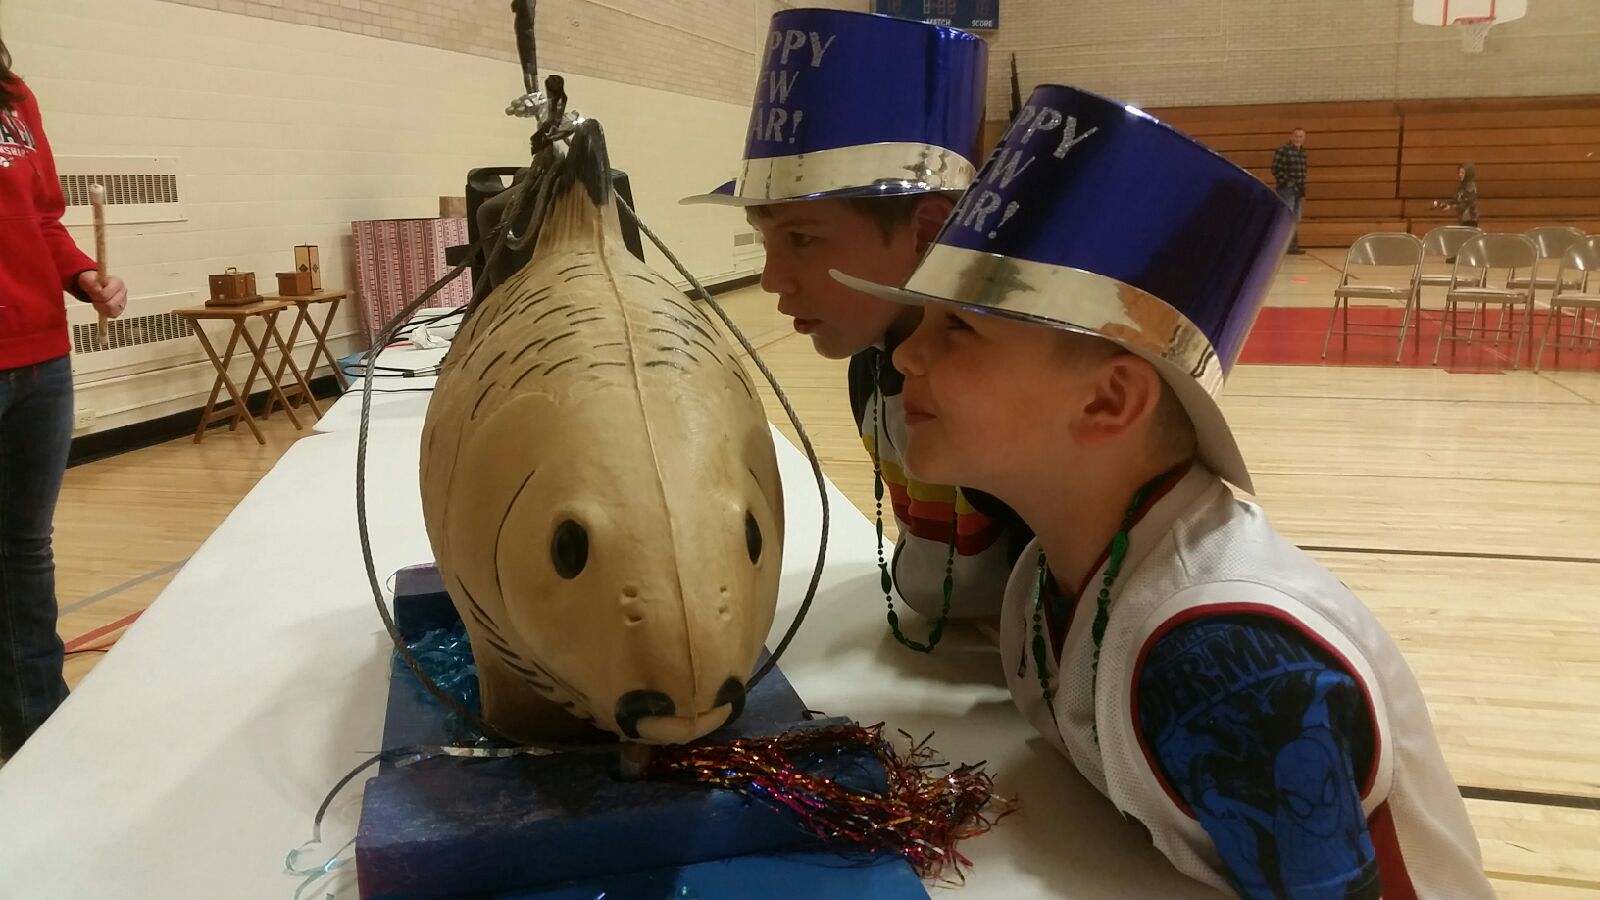 Two kids kiss Lucky the Carp at Carp Fest, a New Year's Eve celebration in Prairie du Chien